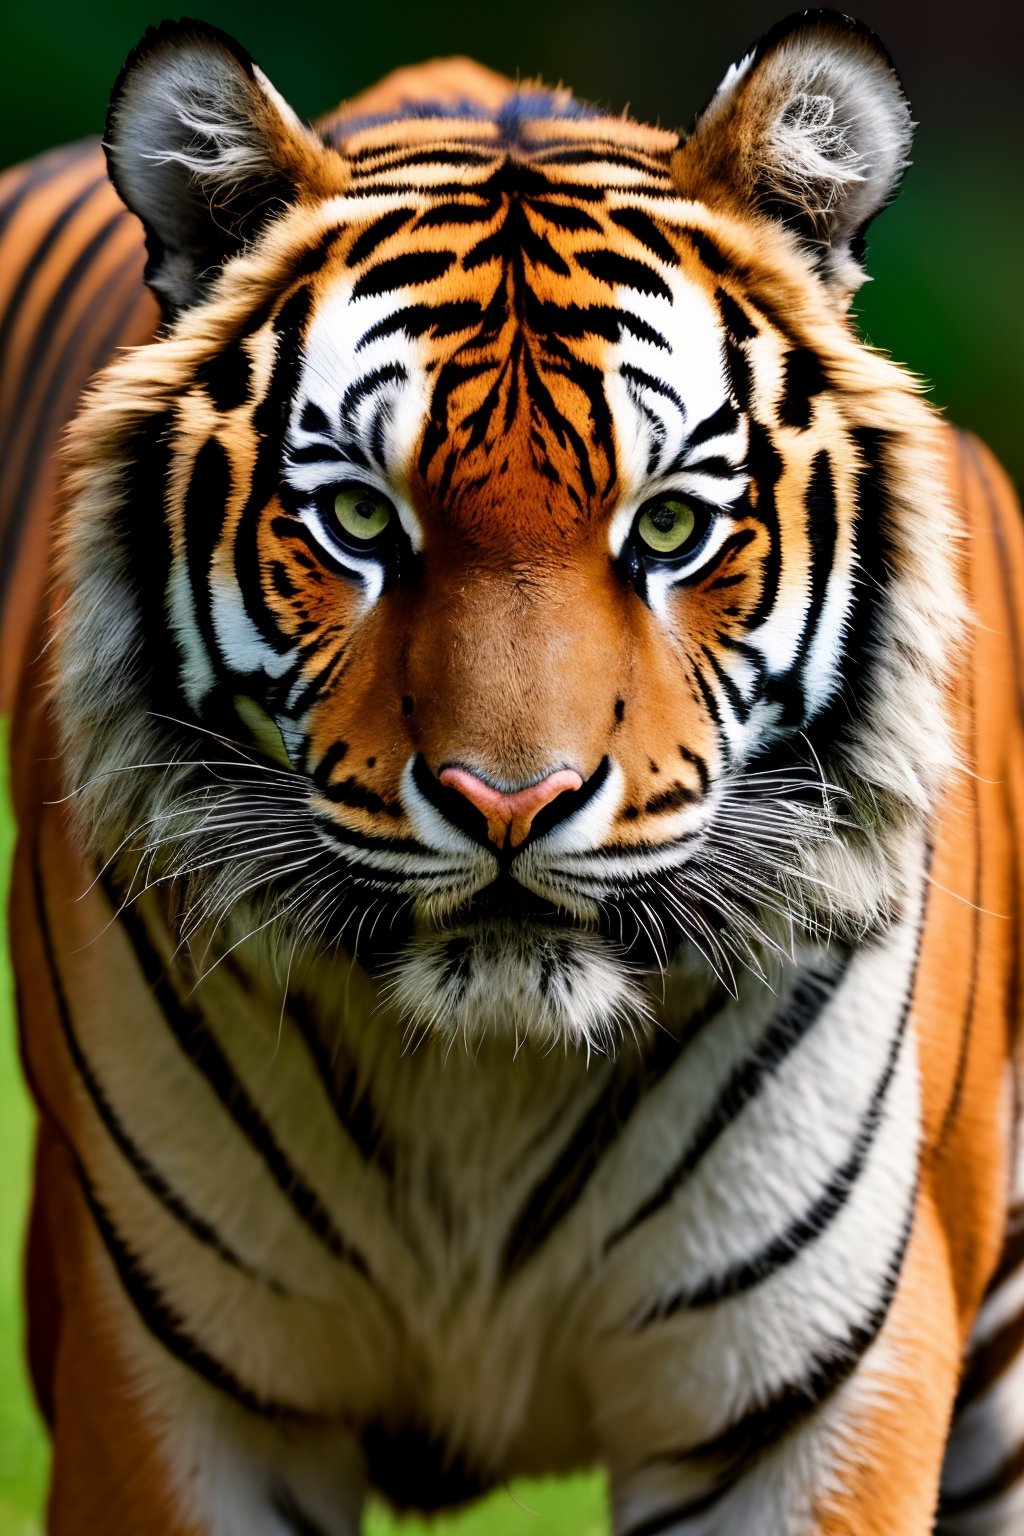 (best quality, 8K, ultra-detailed, masterpiece), (macro photography, close-up shot), Immerse the viewer in the world of a majestic tiger with an 8K masterpiece. Employ the art of macro photography to capture an awe-inspiring close-up of the tiger. Focus on revealing the intricate details of its fur, eyes, and whiskers, allowing the viewer to appreciate the raw beauty and power of this magnificent creature in exquisite ultra-detail.